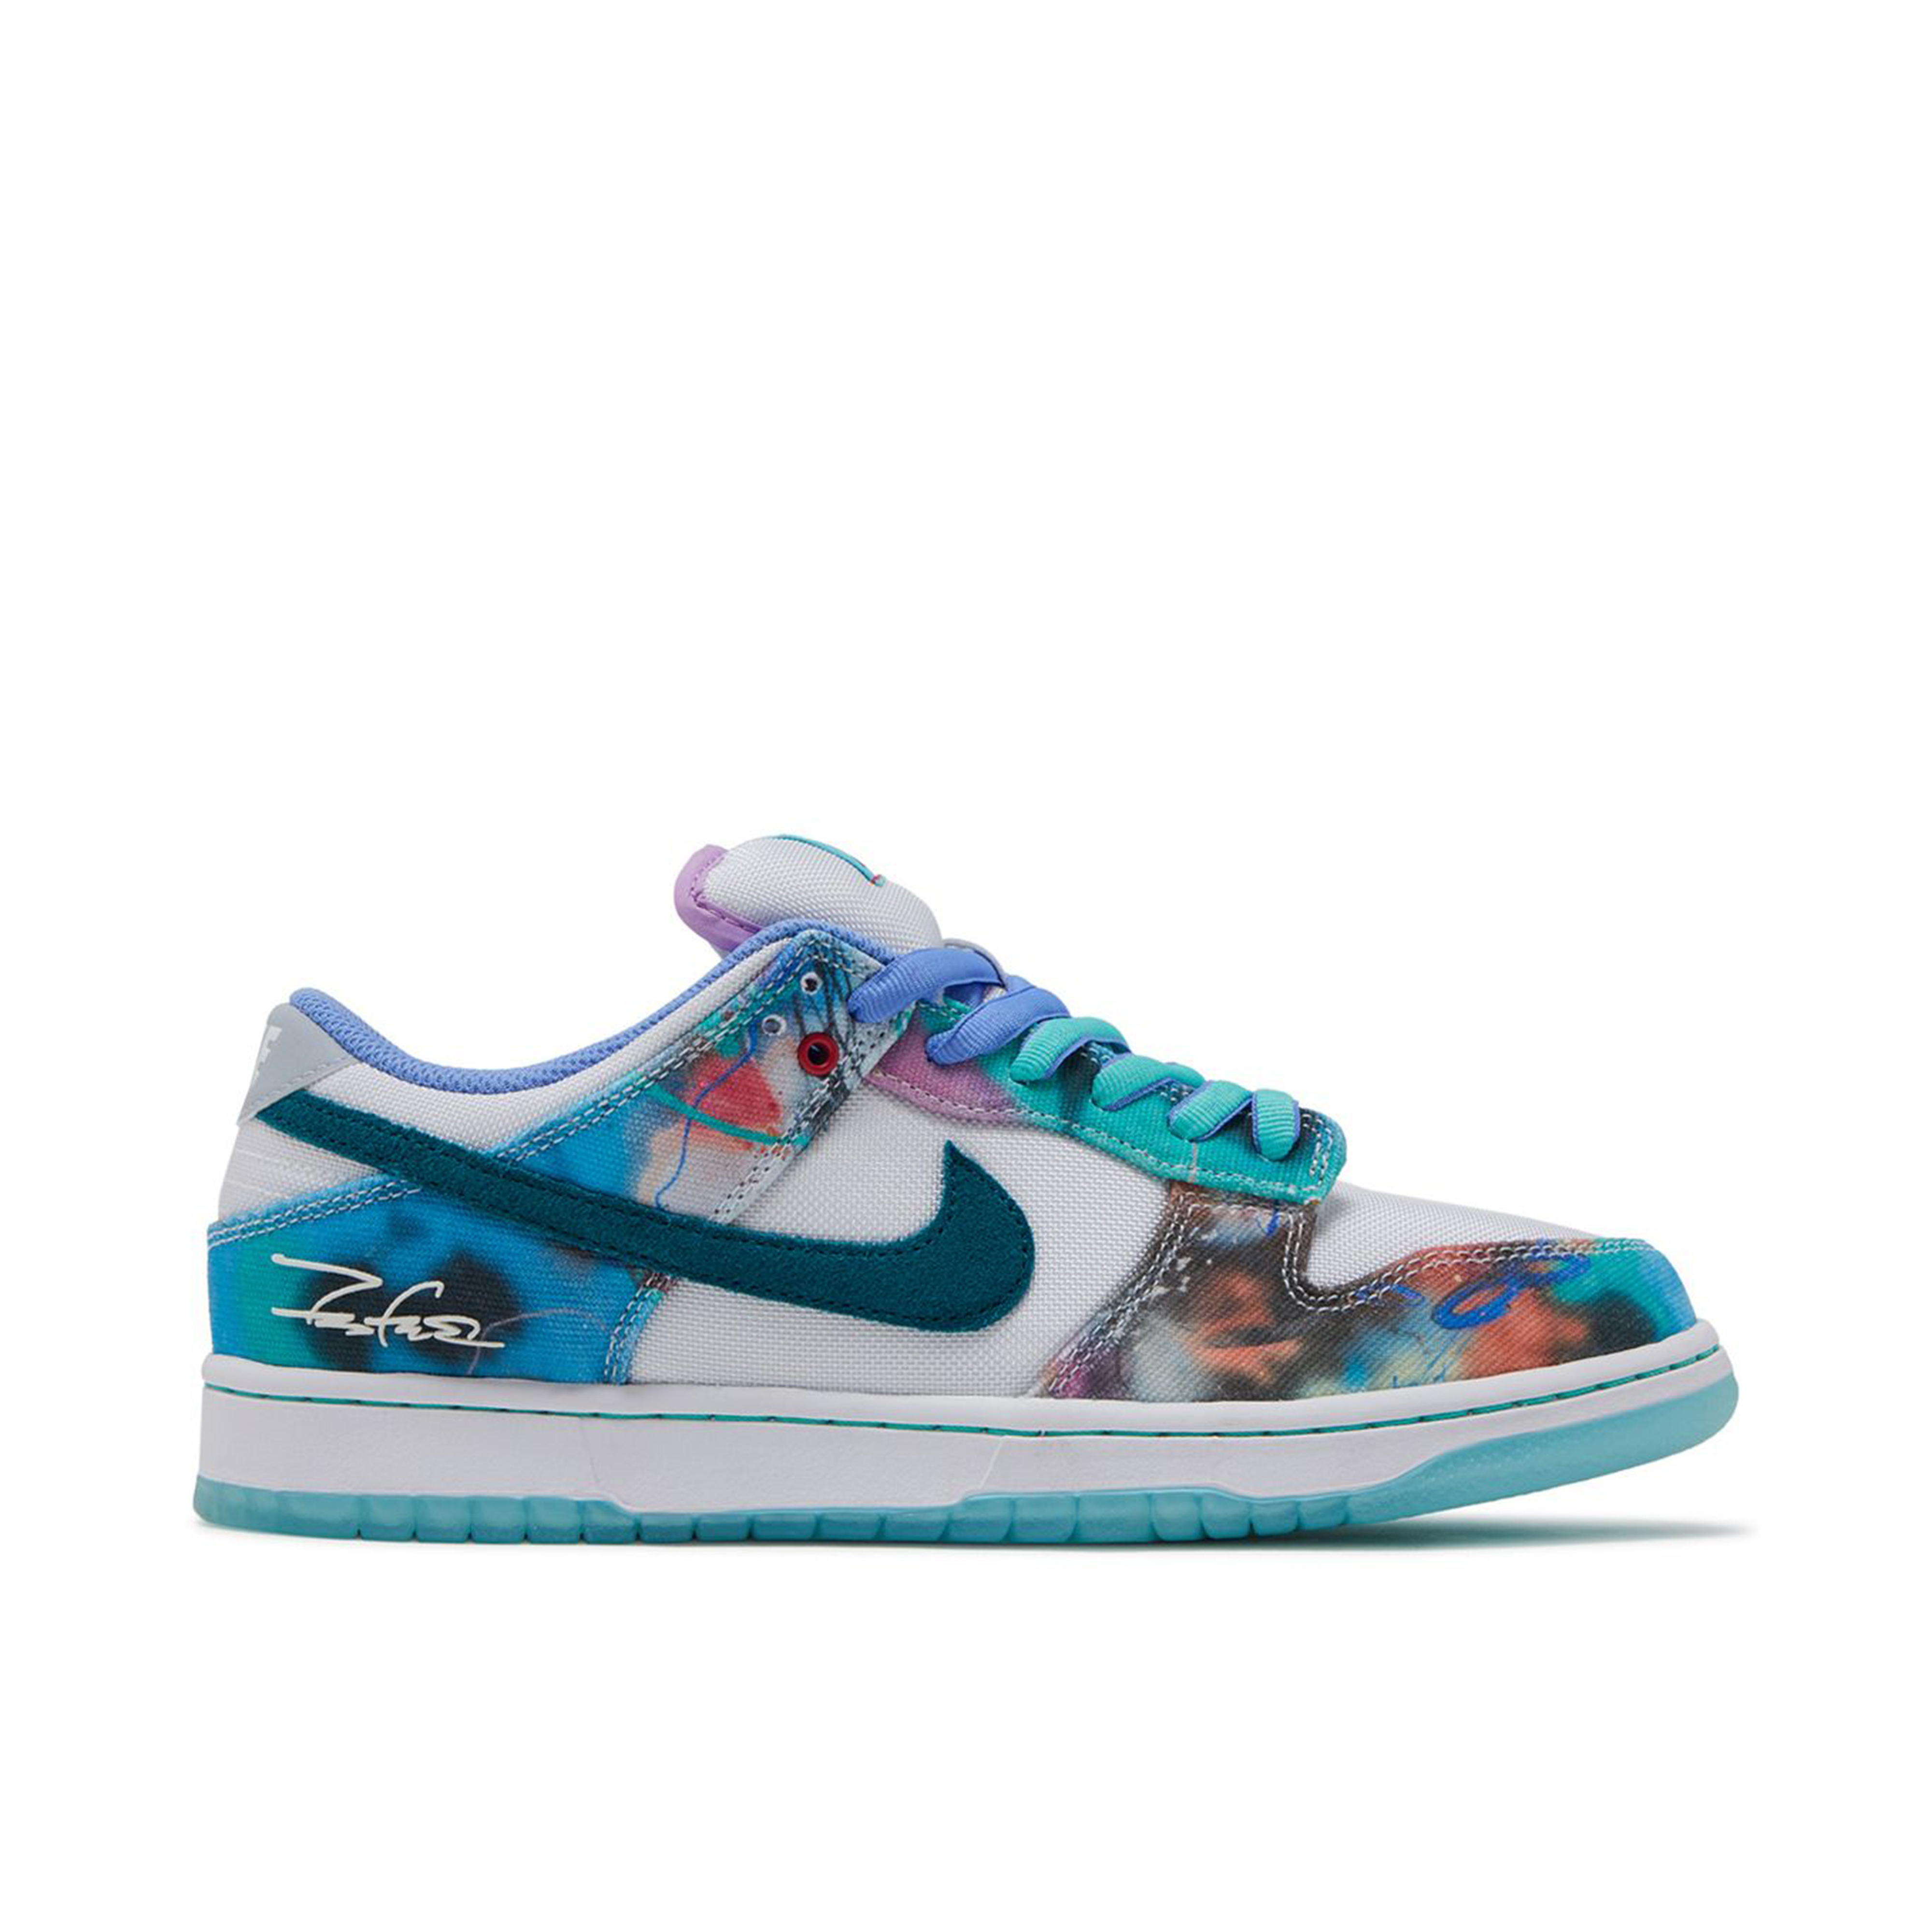 Nike SB Dunk Low Pro x Why So Sad? | DX5549-400 | Laced